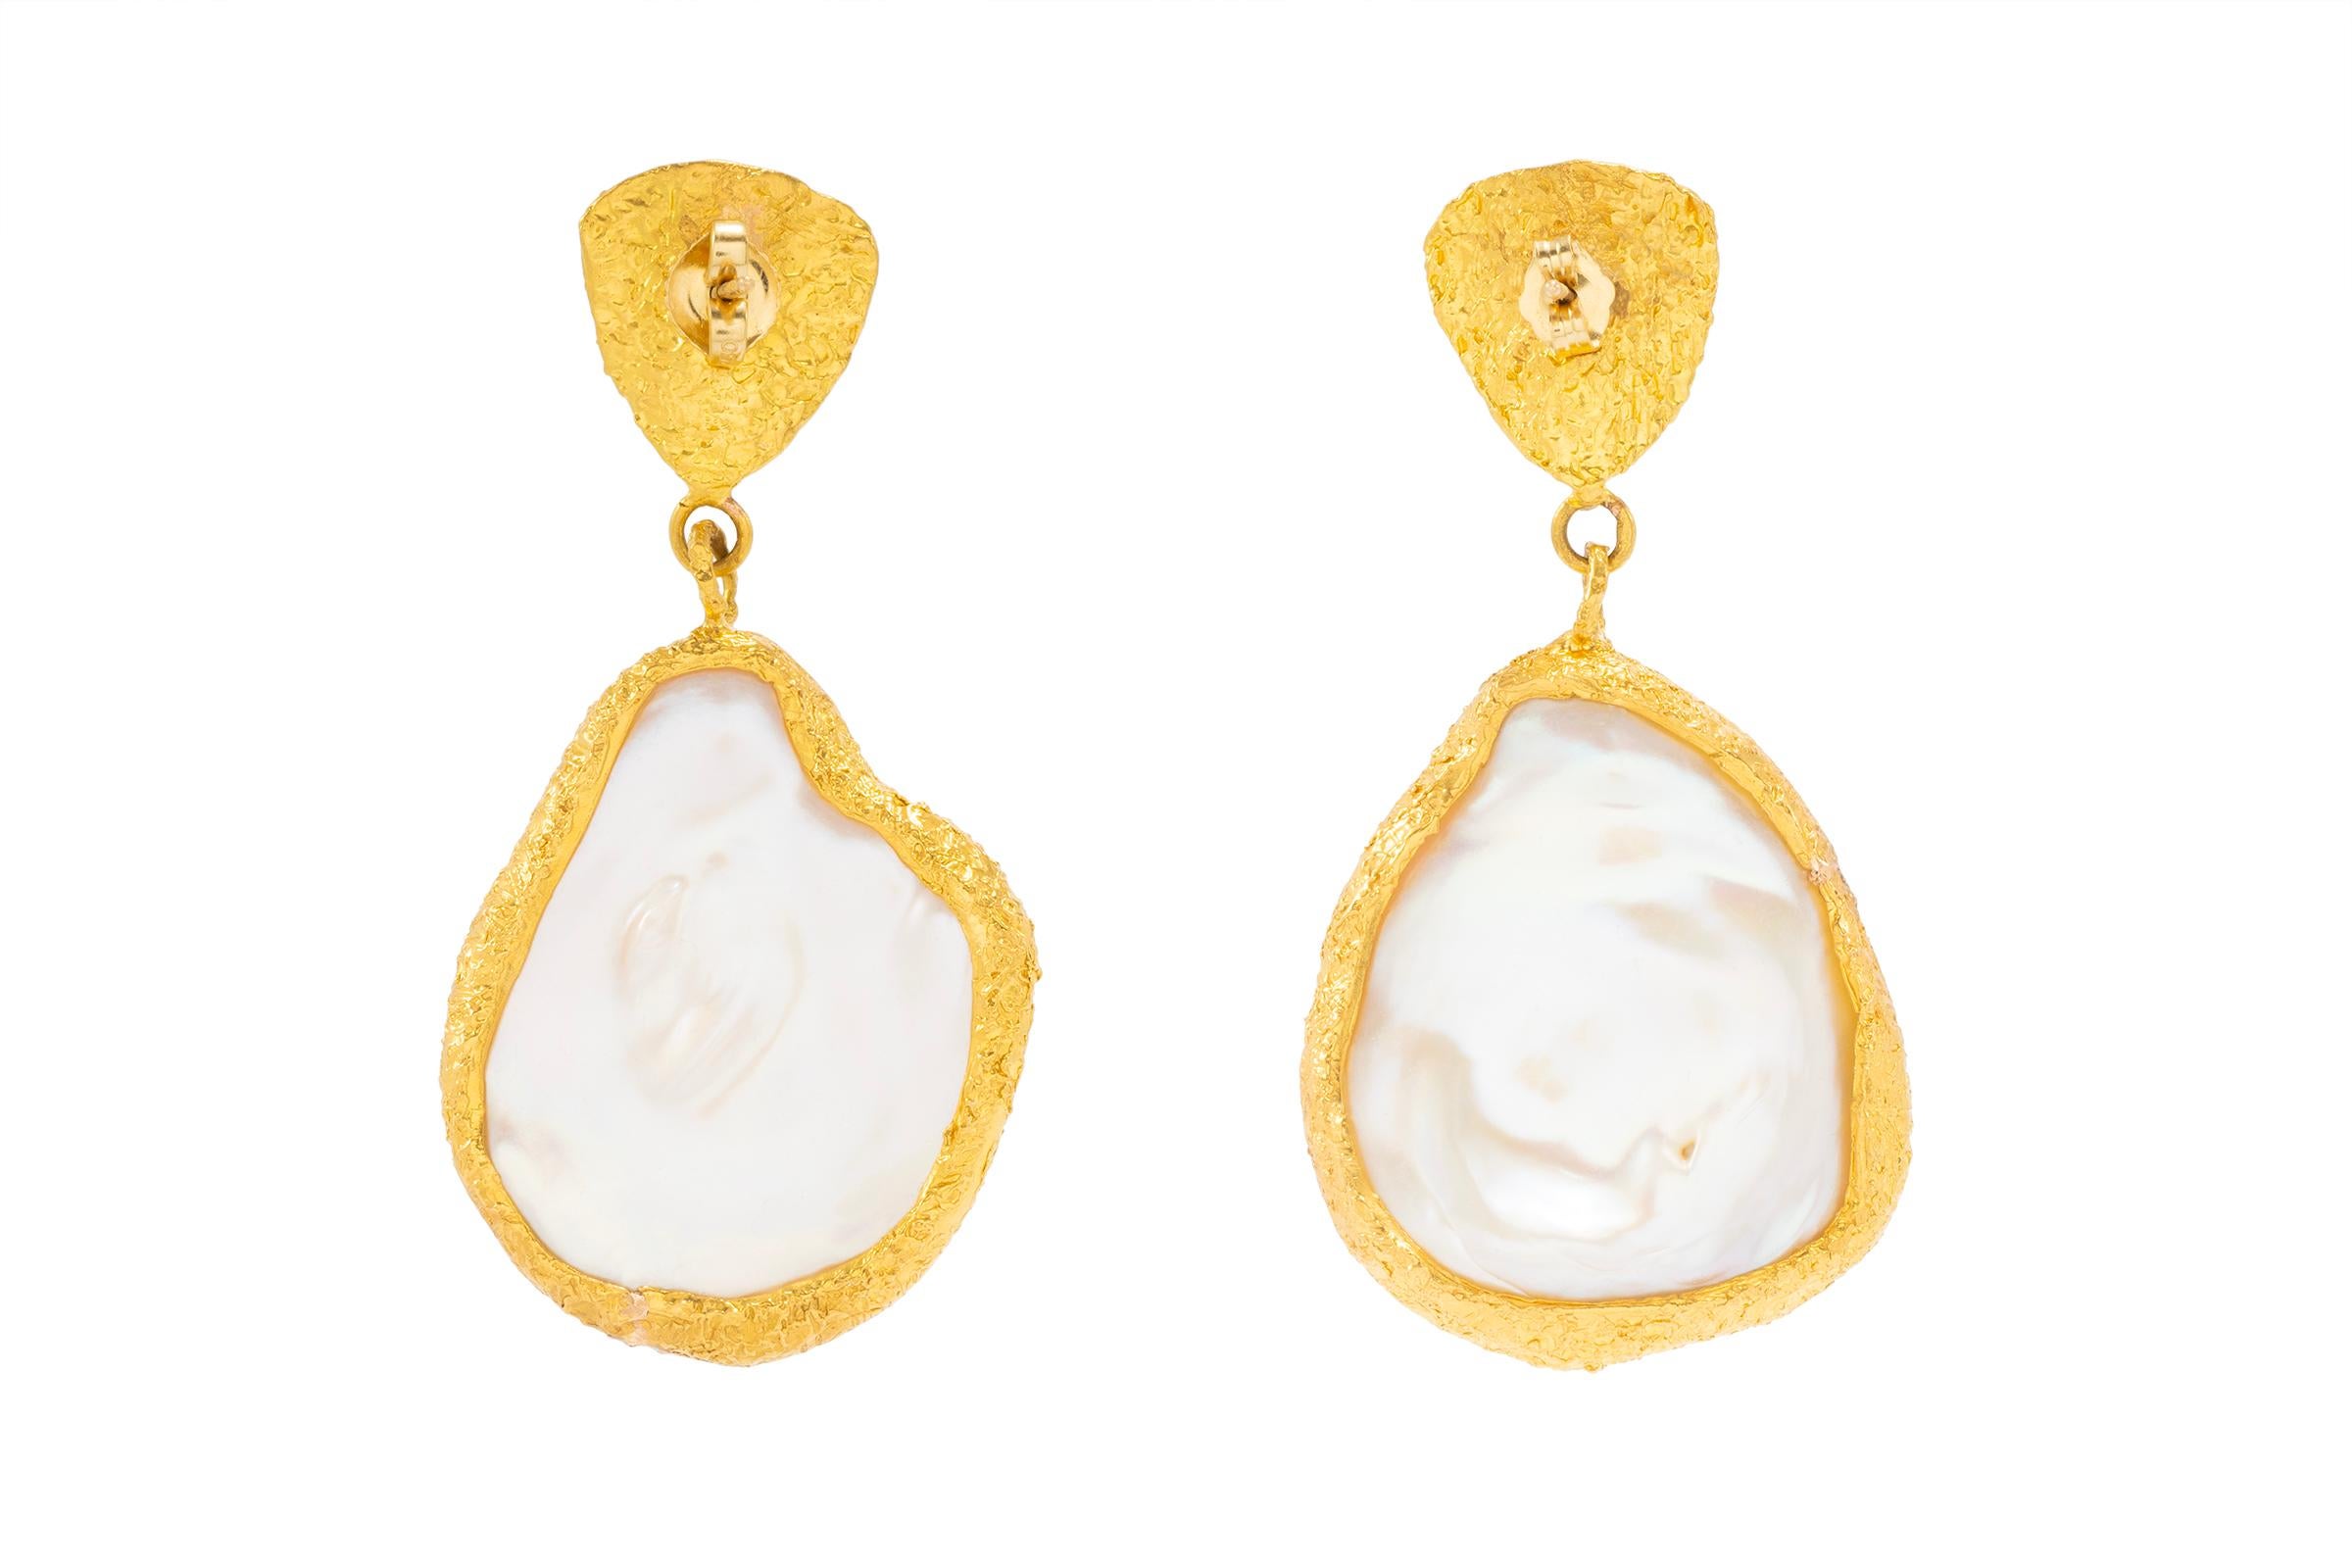 22k Gold Pearl Teardrop Earrings by Tagili In New Condition For Sale In New York, NY